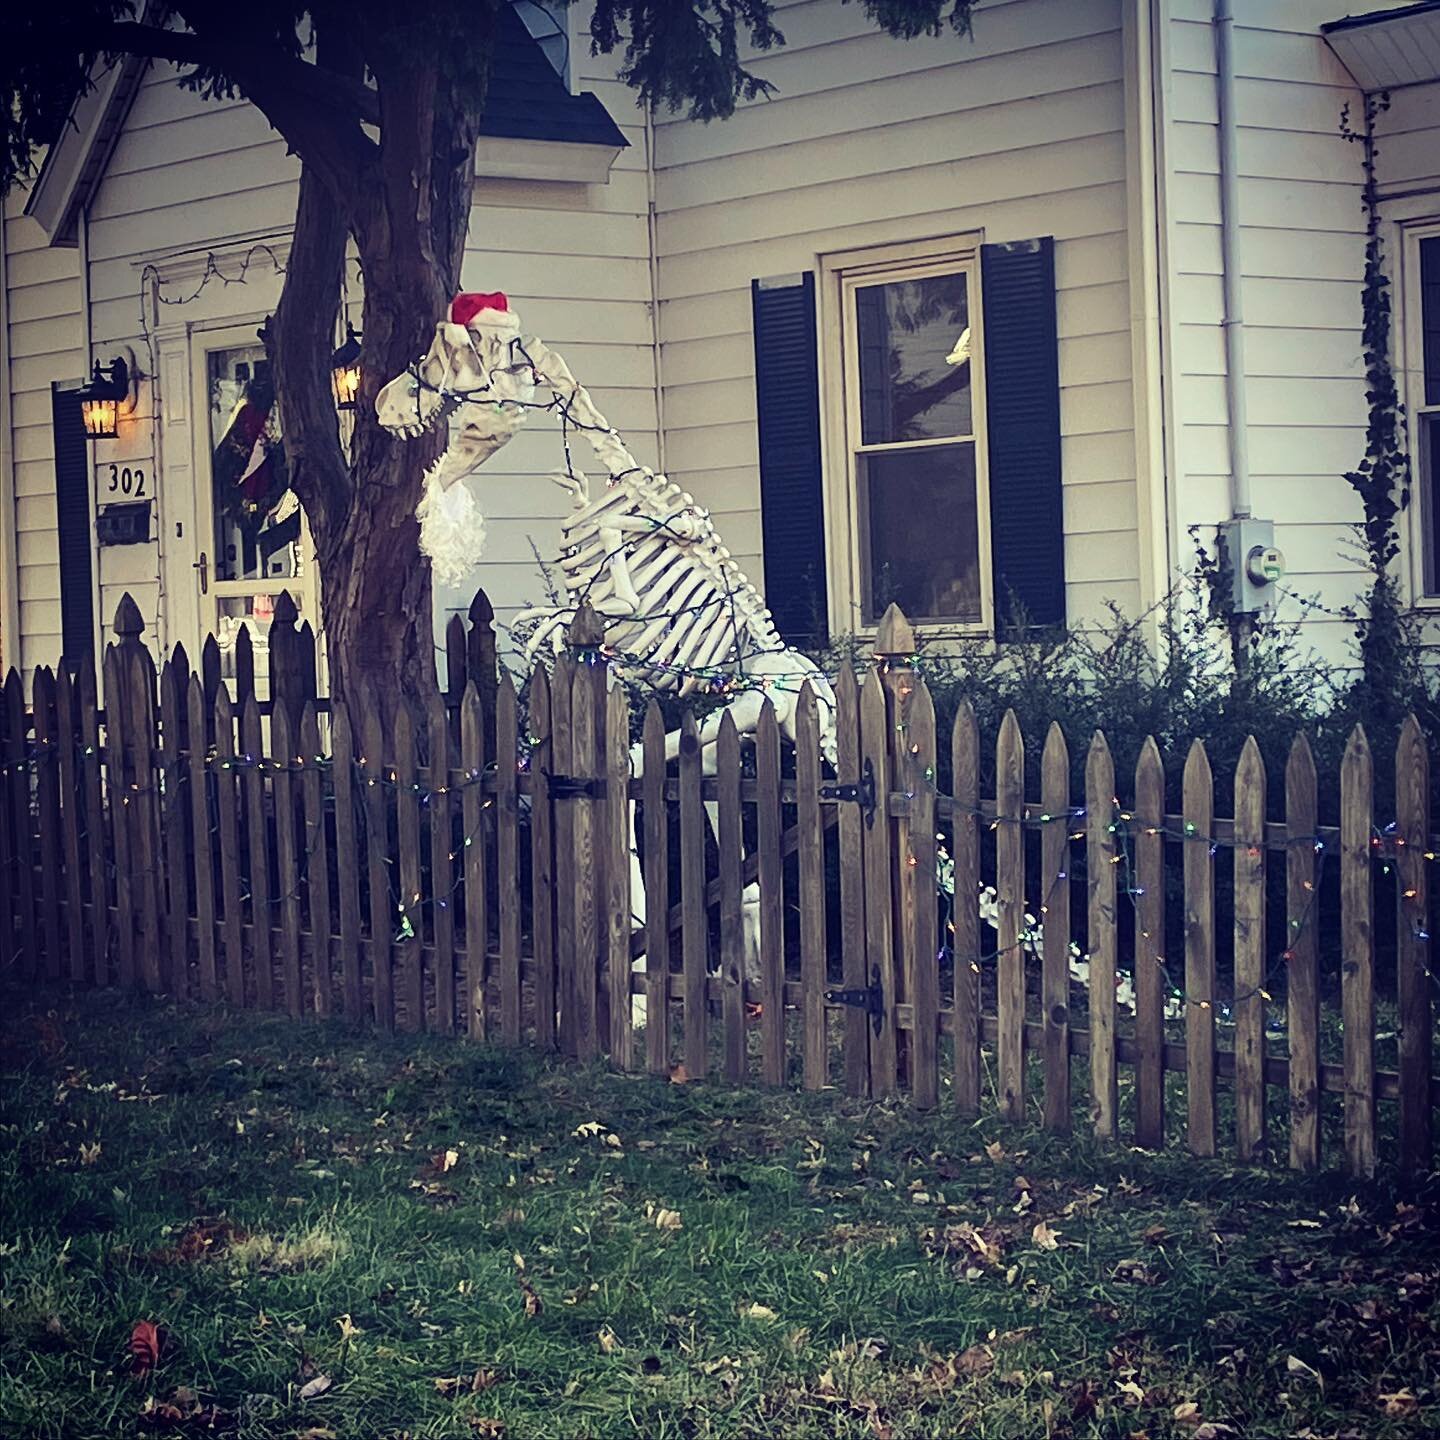 Saw this in my hood today while running errands. Yes, that&rsquo;s a life size Dino skeleton with Christmas lights, Santa hat and beard. Must return at night to witness it lit up.